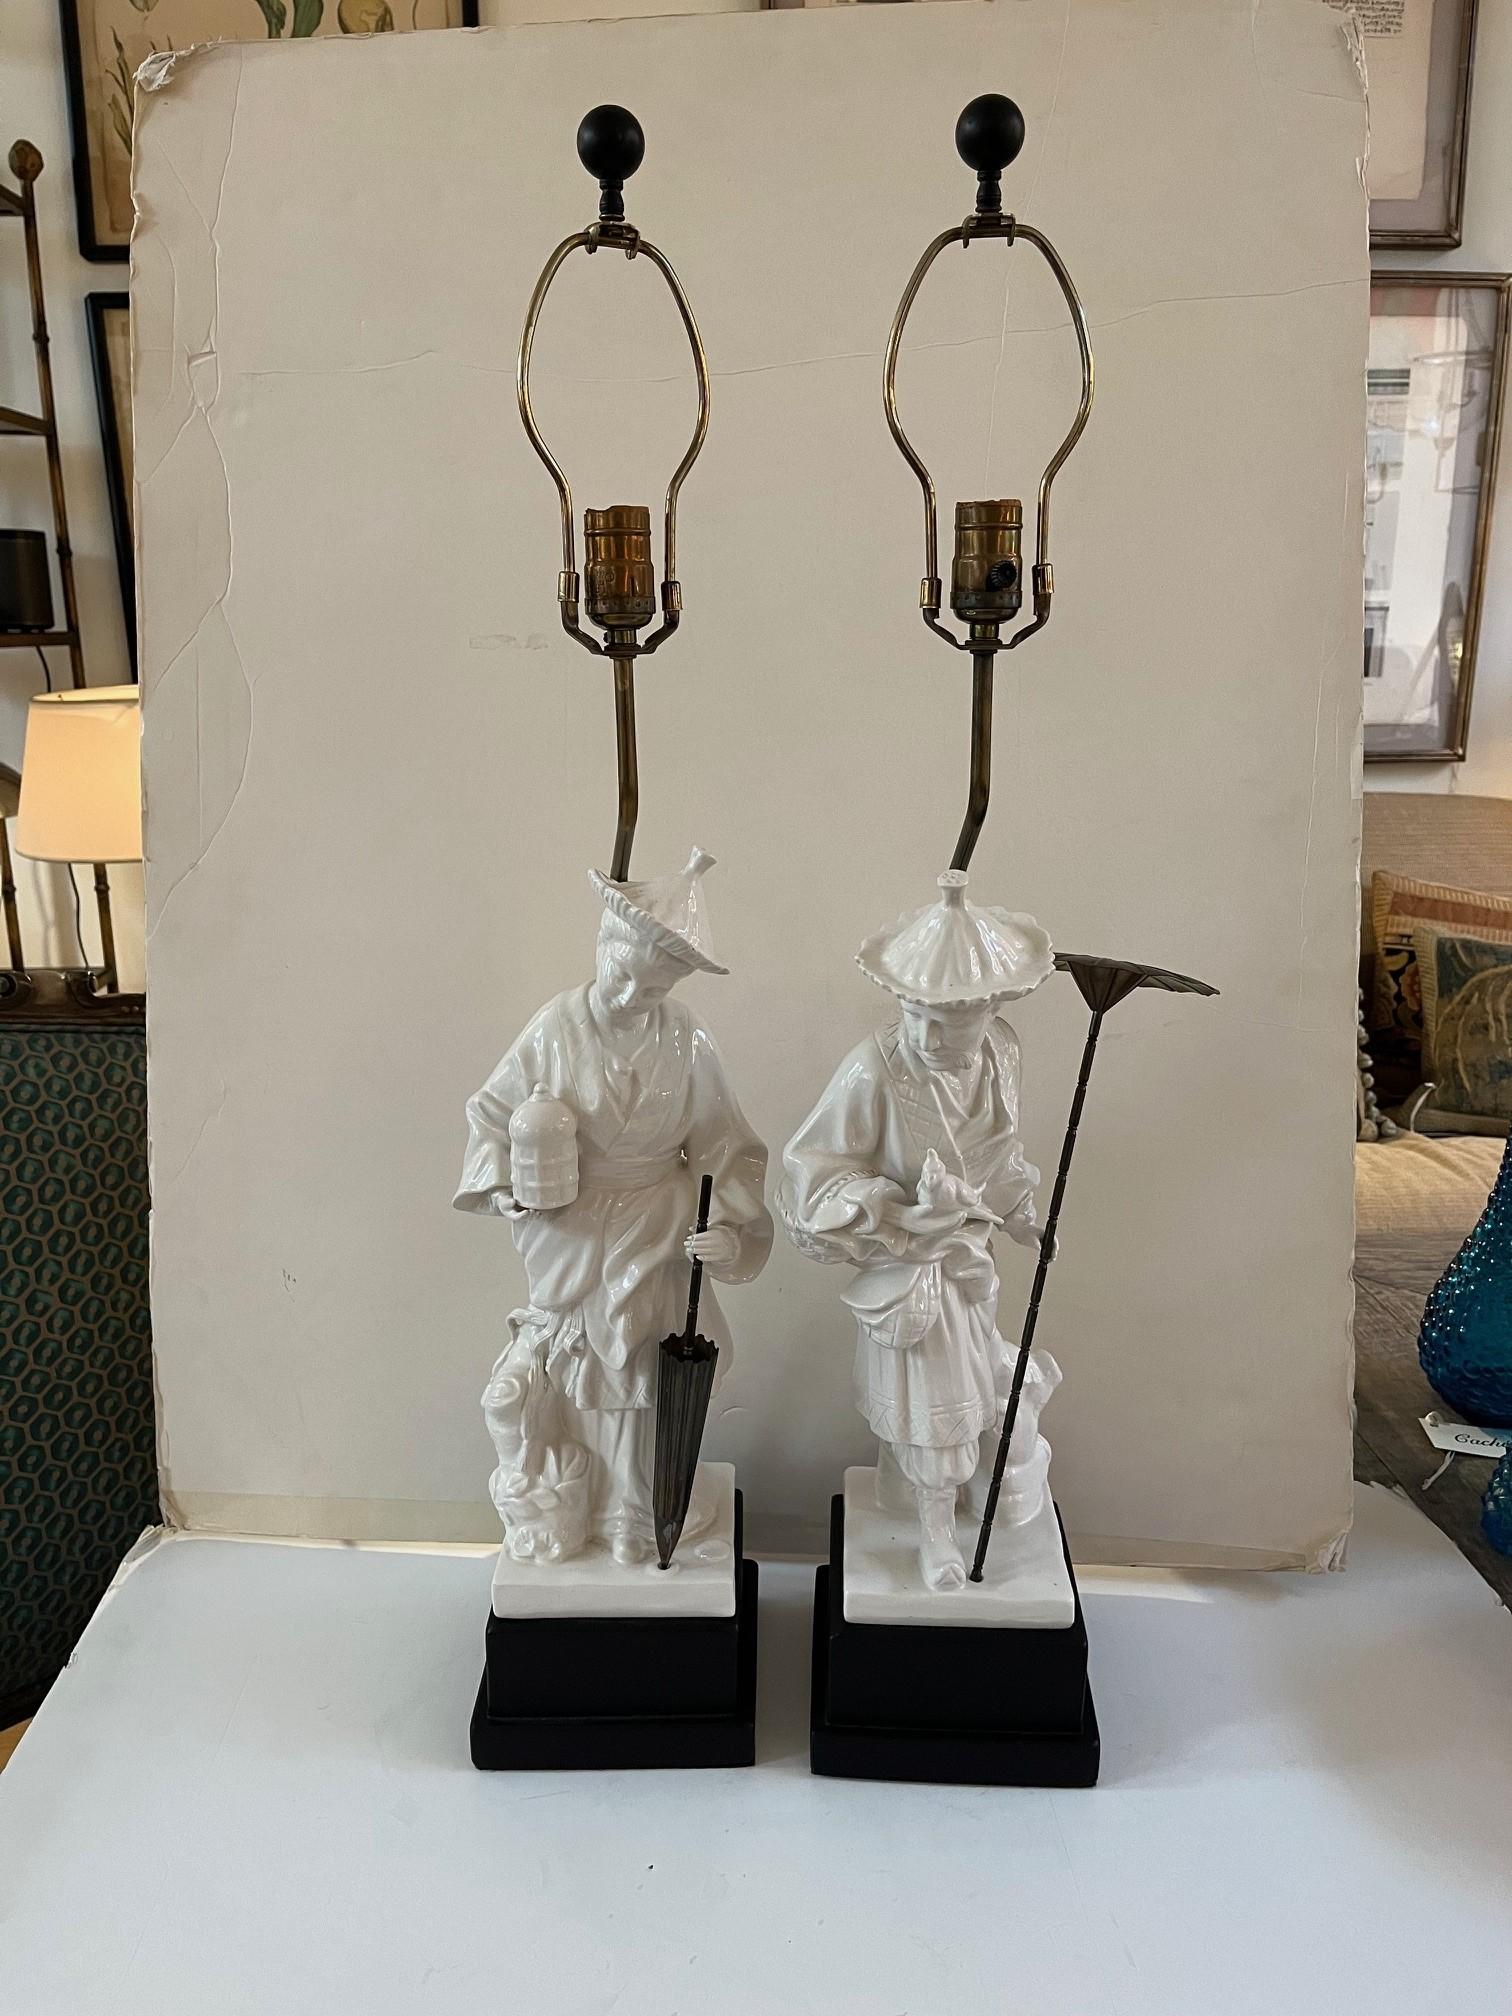 Pair of Vintage Chapman Porcelain Chinoiserie Figural Table Lamps, features Woman holding a Birdcage and a Parasole, and a Man with a Bird and Brass Parasole, the Lamps are in working Condition. Circa: 1973
